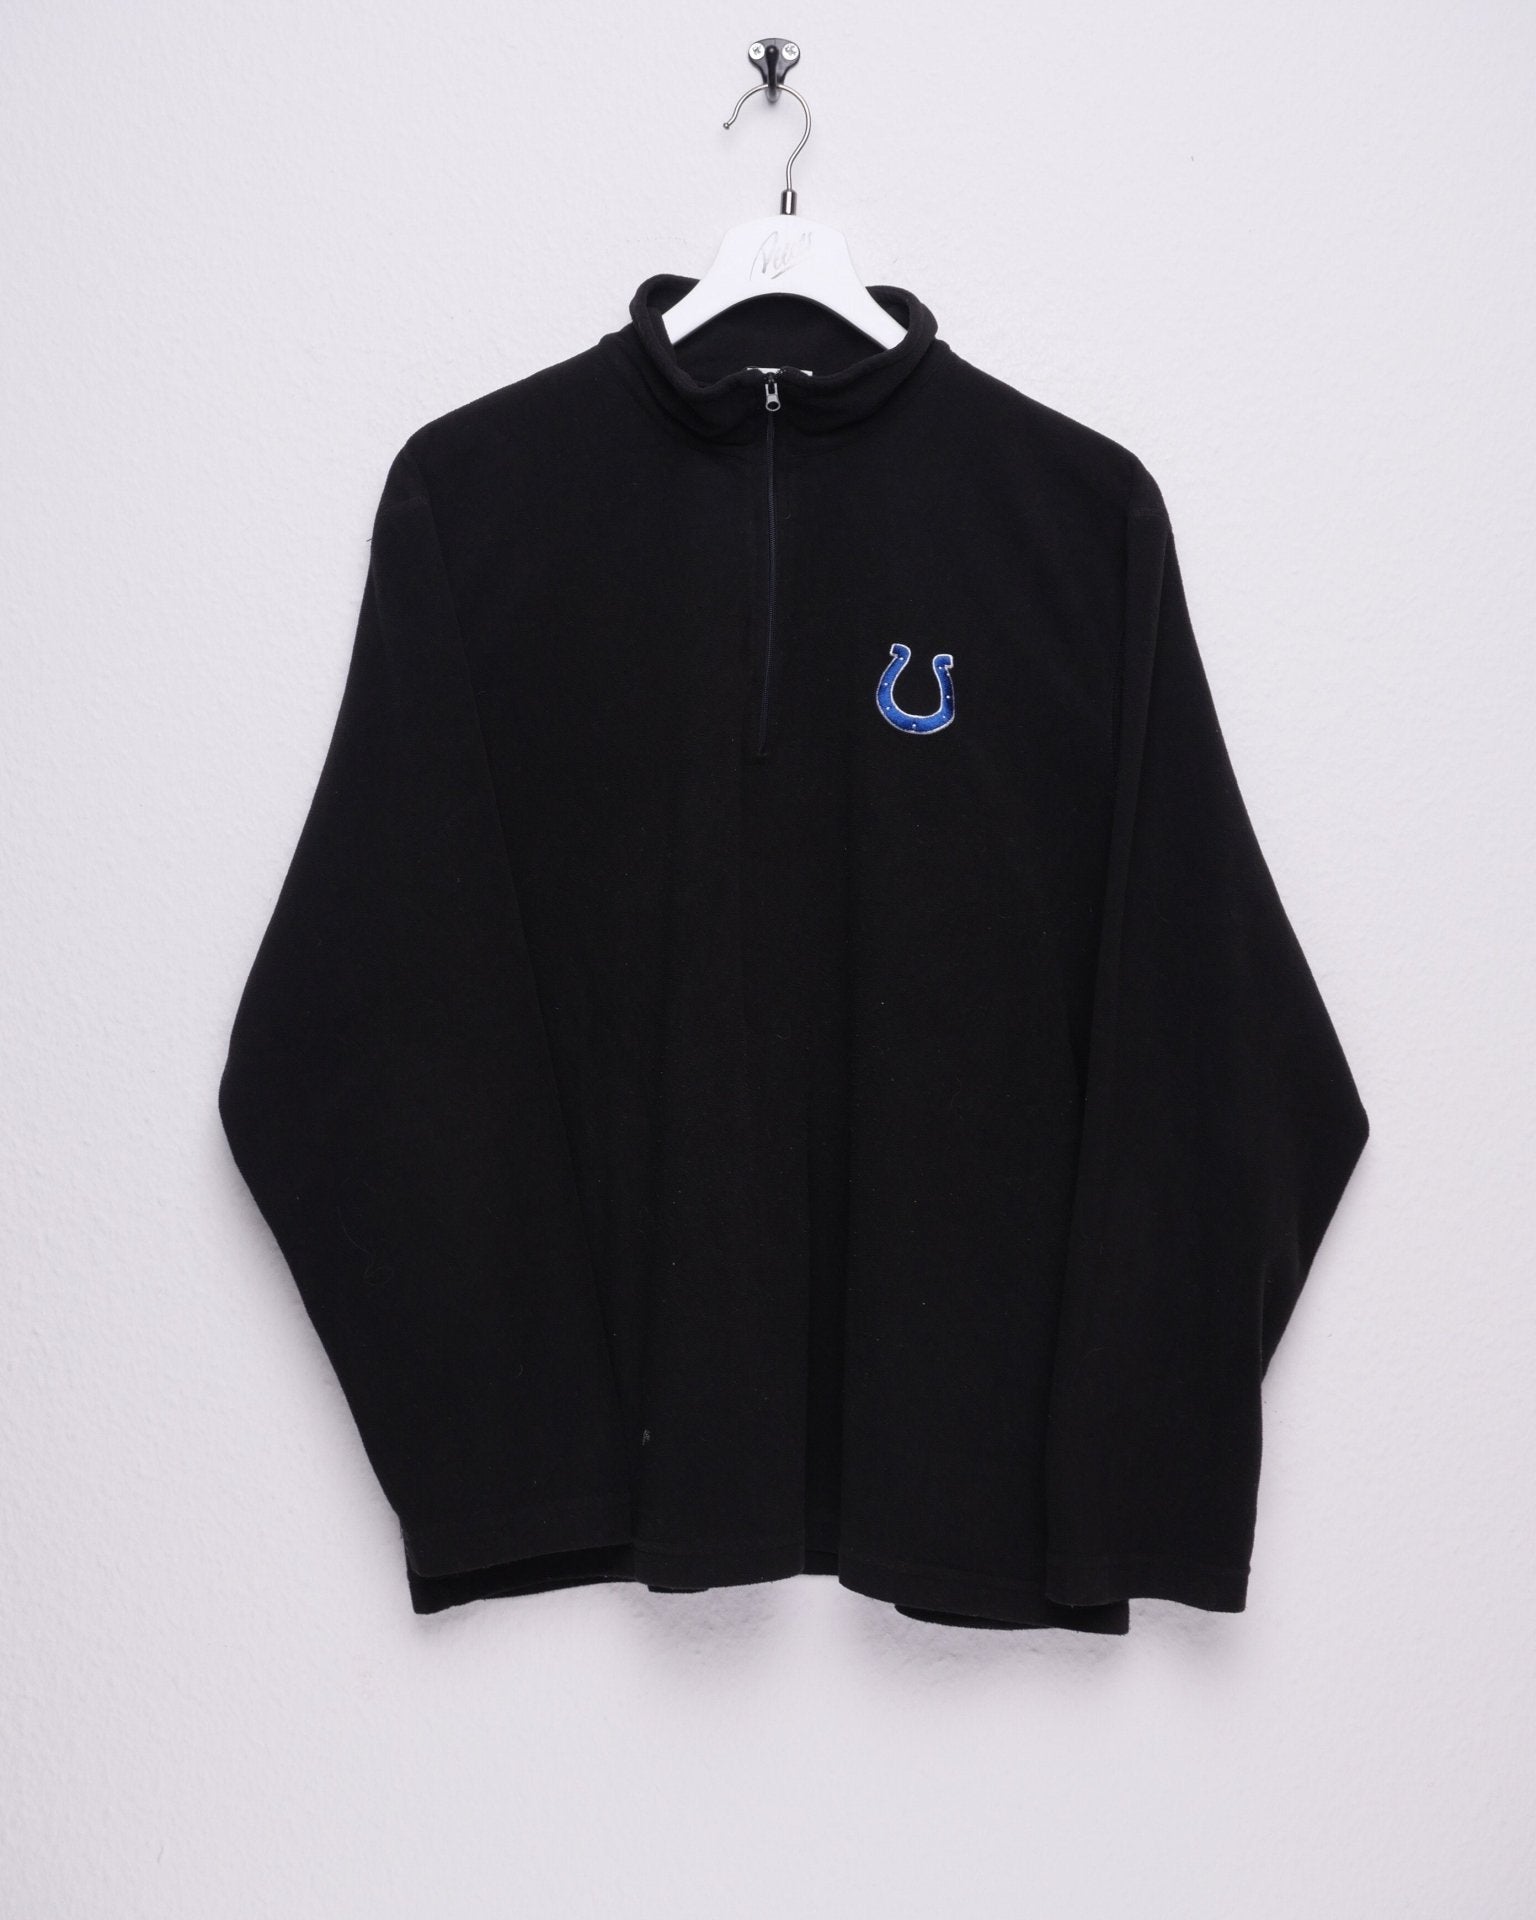 NFL 'Indianapolis Colts' embroidered Logo black Fleece Half Zip Sweater - Peeces